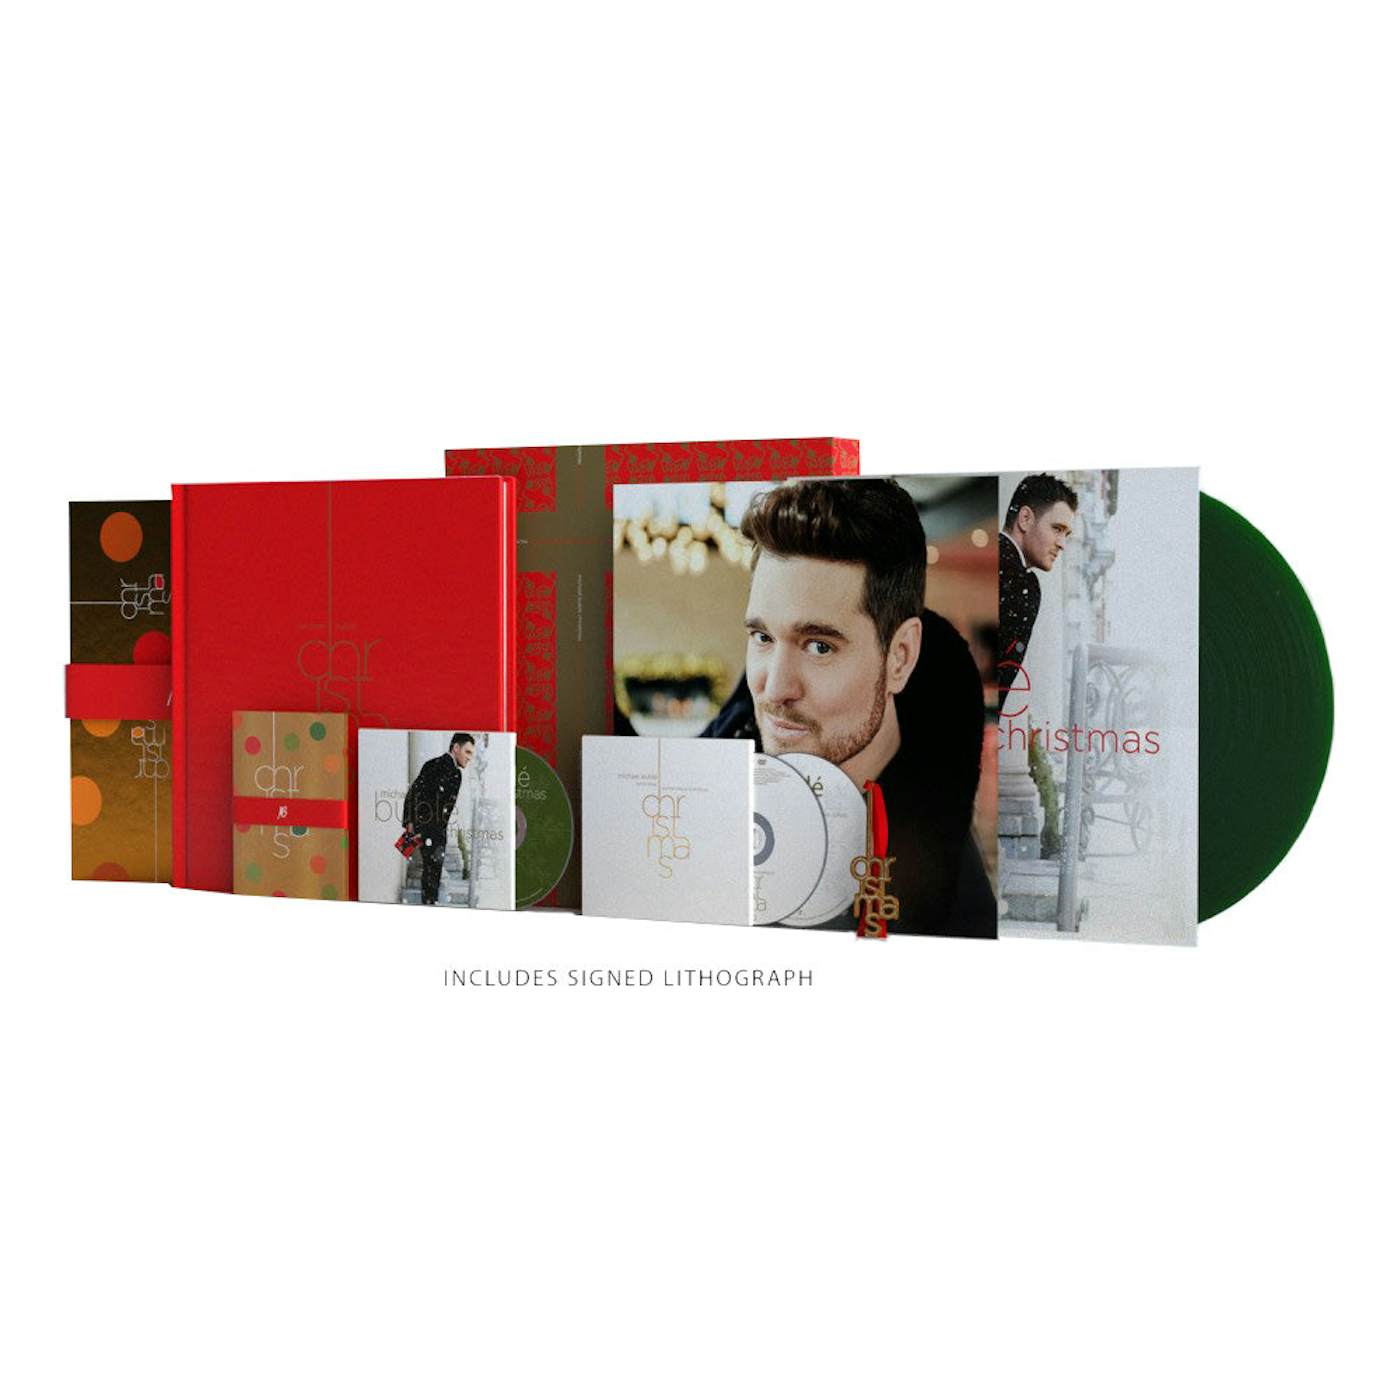 Michael Bublé Christmas 10th Anniversary Super Deluxe Box Set (Signed Limited Edition)